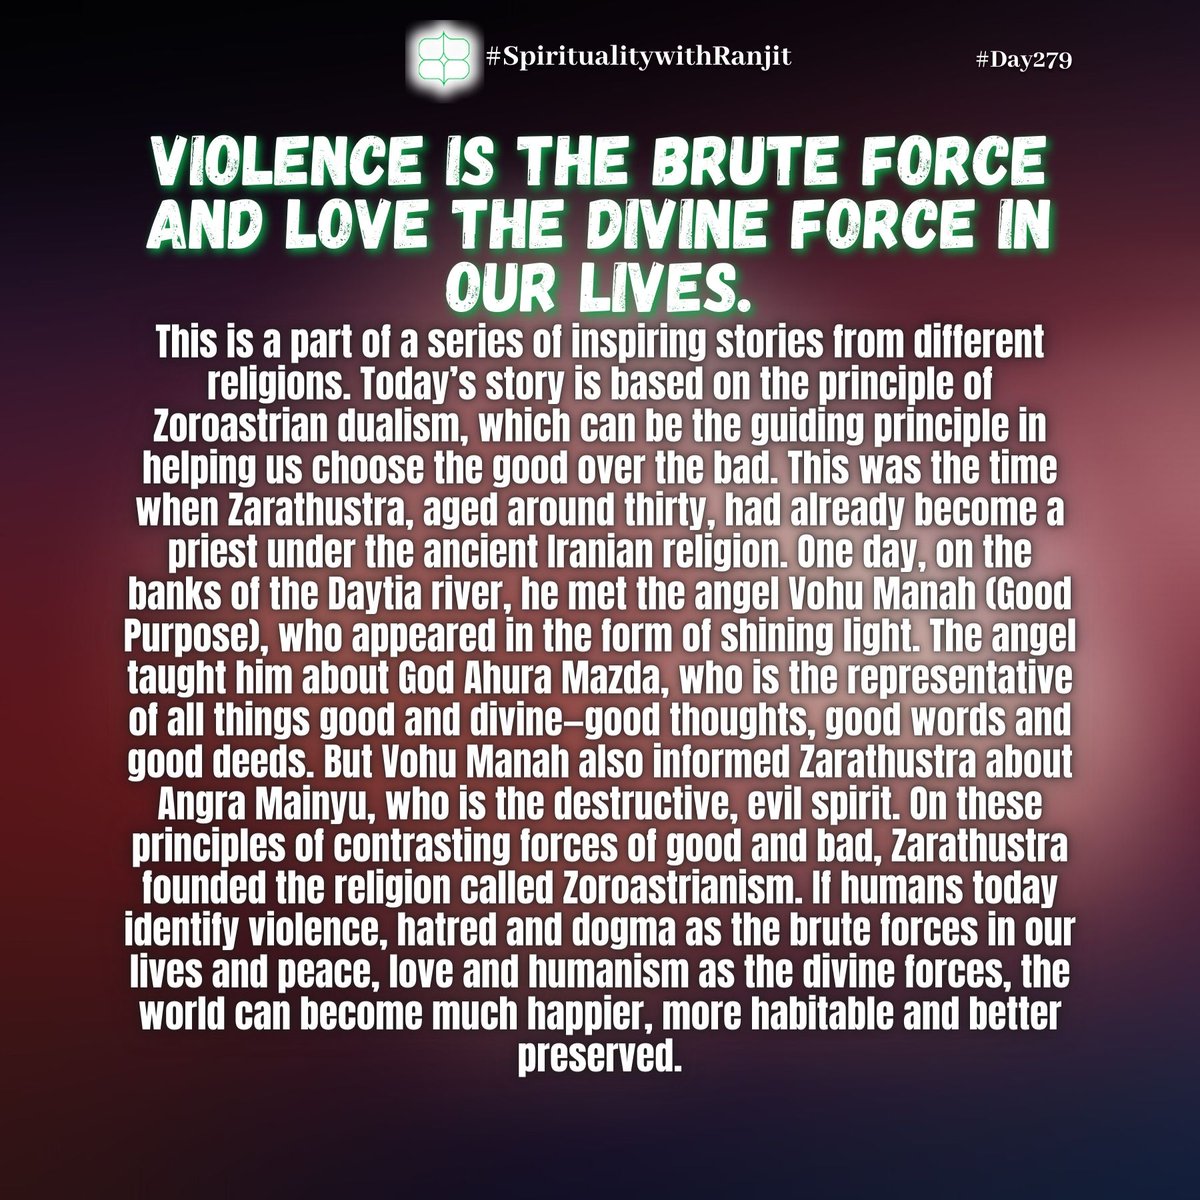 Do read all the messages in this thread! Retweet if you like. (2/5) #Post279  #SpiritualitywithRanjit  #Zoroastrianism  #Dualism  #Hormazd  #Violence  #Love